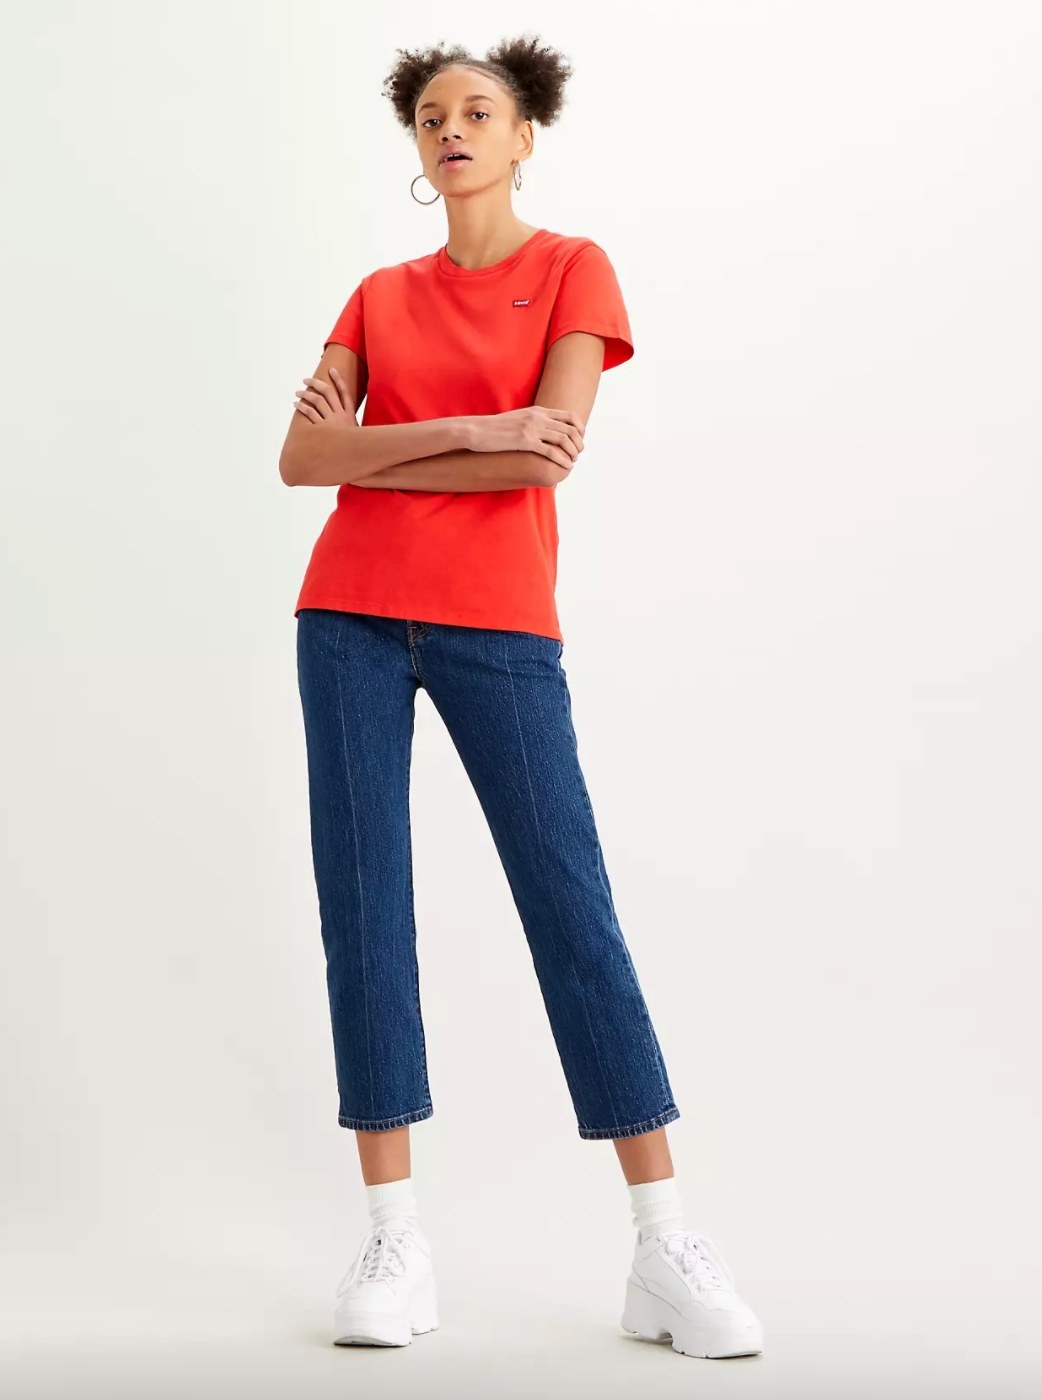 The pair of 501 cropped jeans on model wearing a red t-shirt